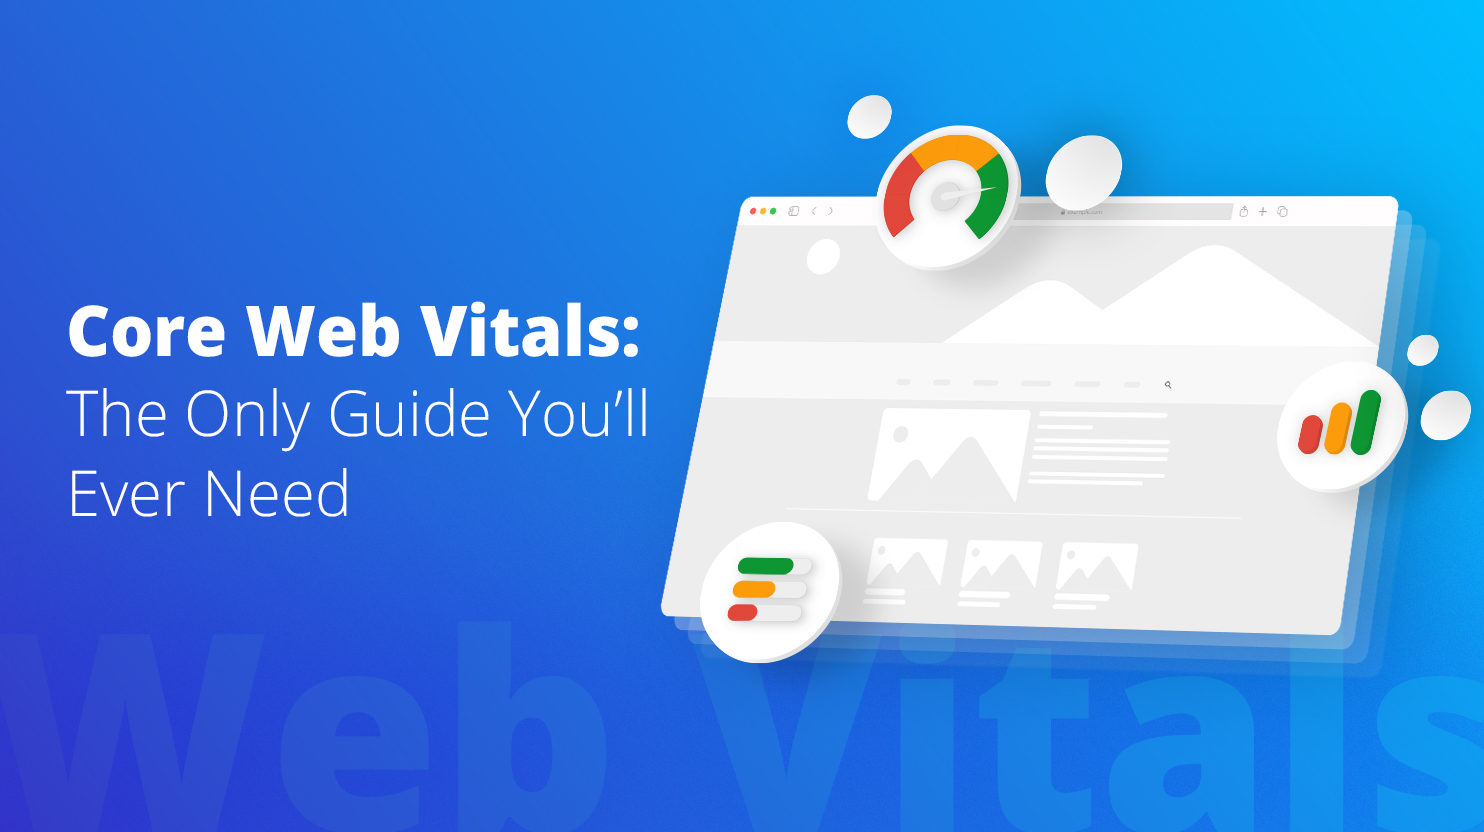 Core Web Vitals: The Only Guide You’ll Ever Need